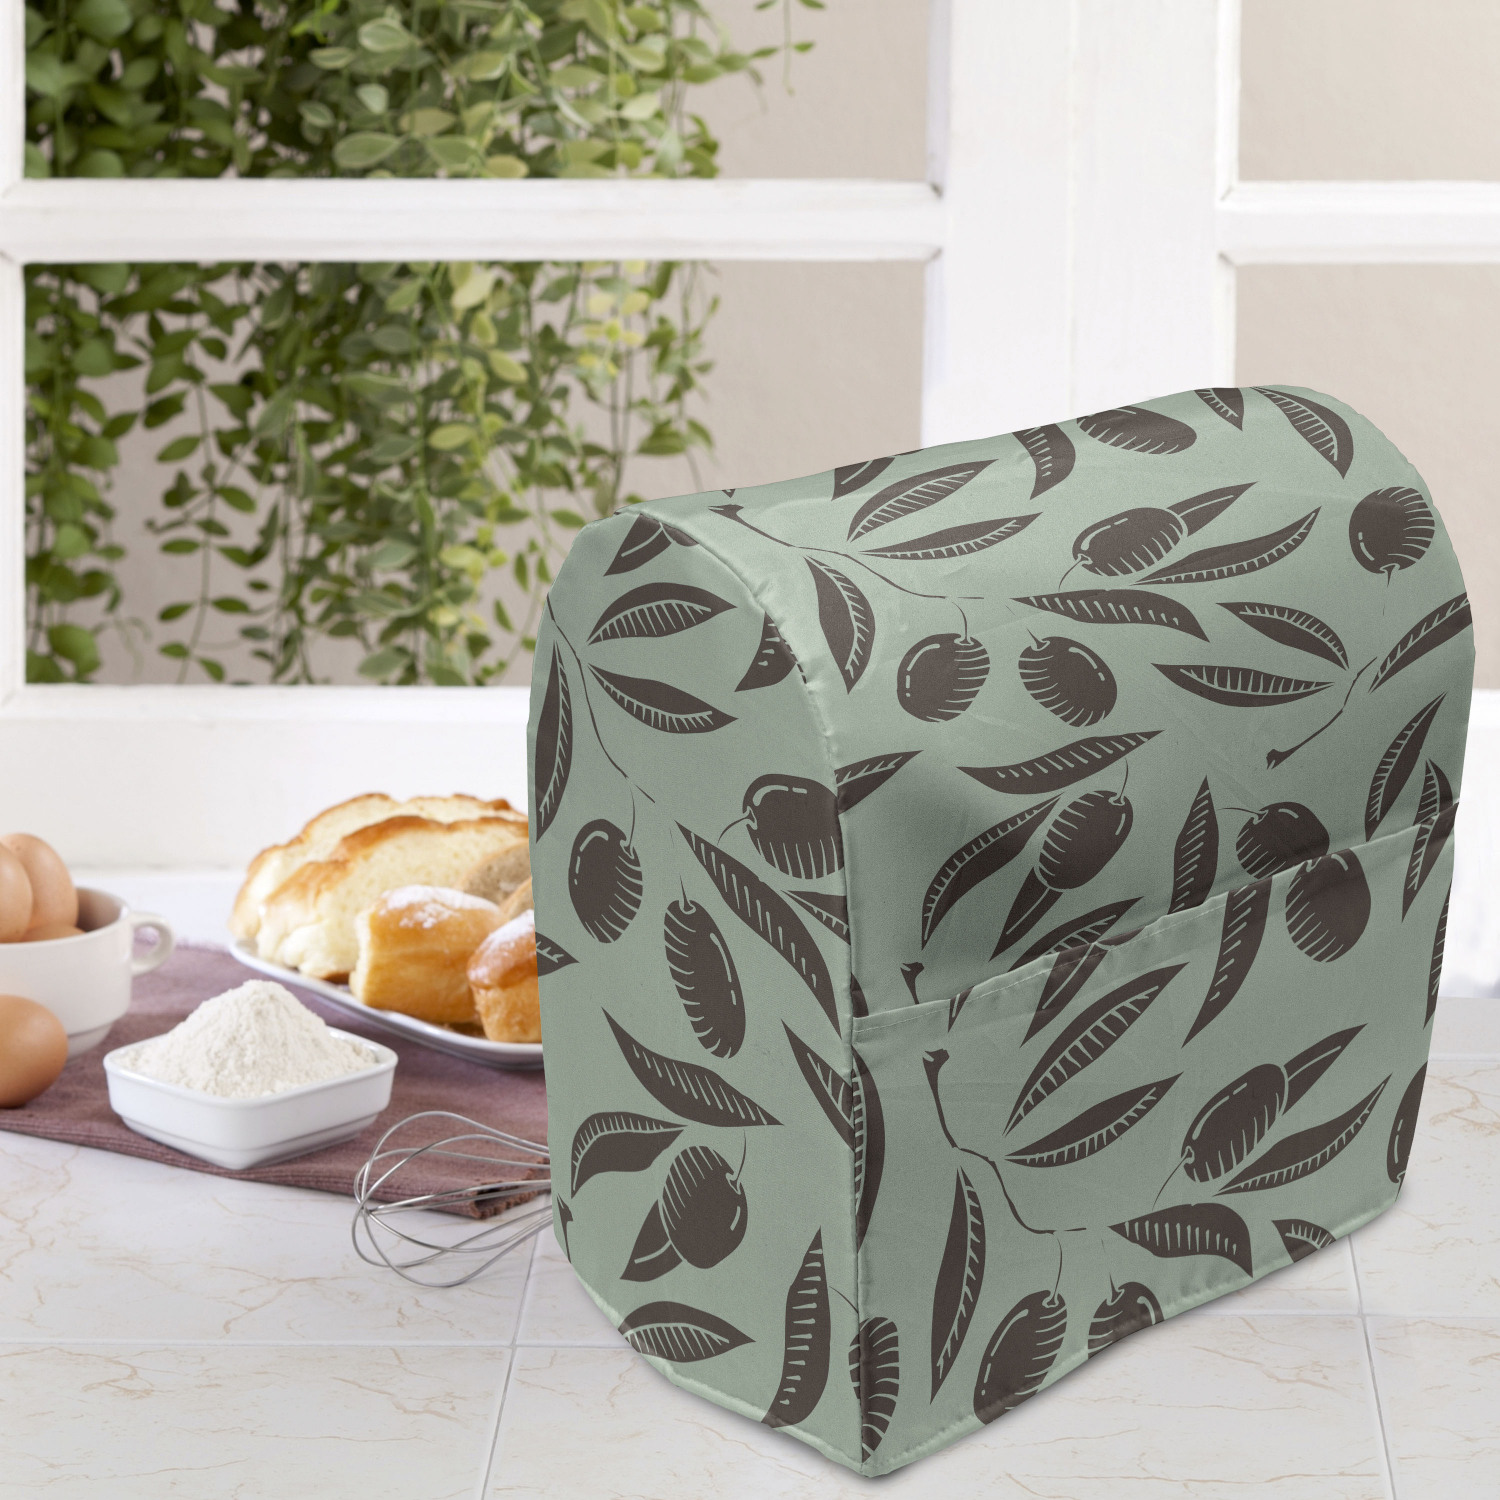 Harvest Stand Mixer Cover, Agriculture Olive Tree Branches Earth Tones Italian Cuisine Organic, Kitchen Appliance Organizer Bag Cover with Pockets, 5 Quarts, Brown and Almond Green, by Ambesonne - image 3 of 4